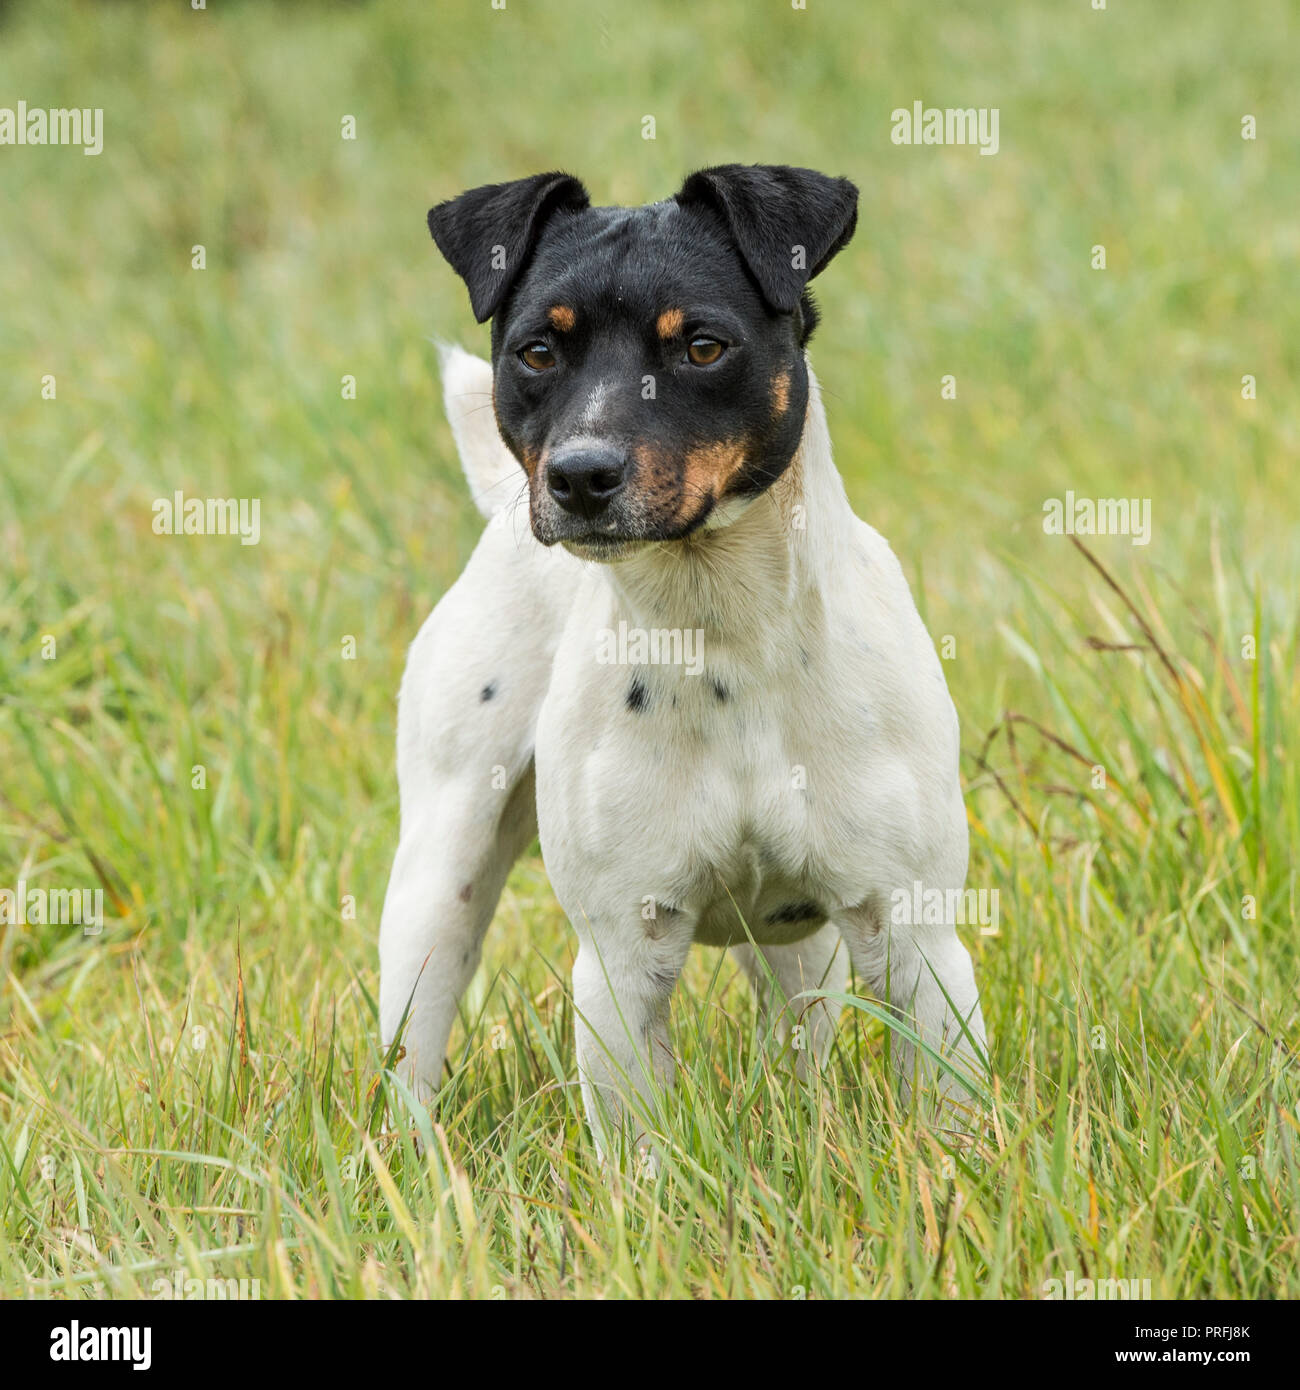 jack russell dog Stock Photo